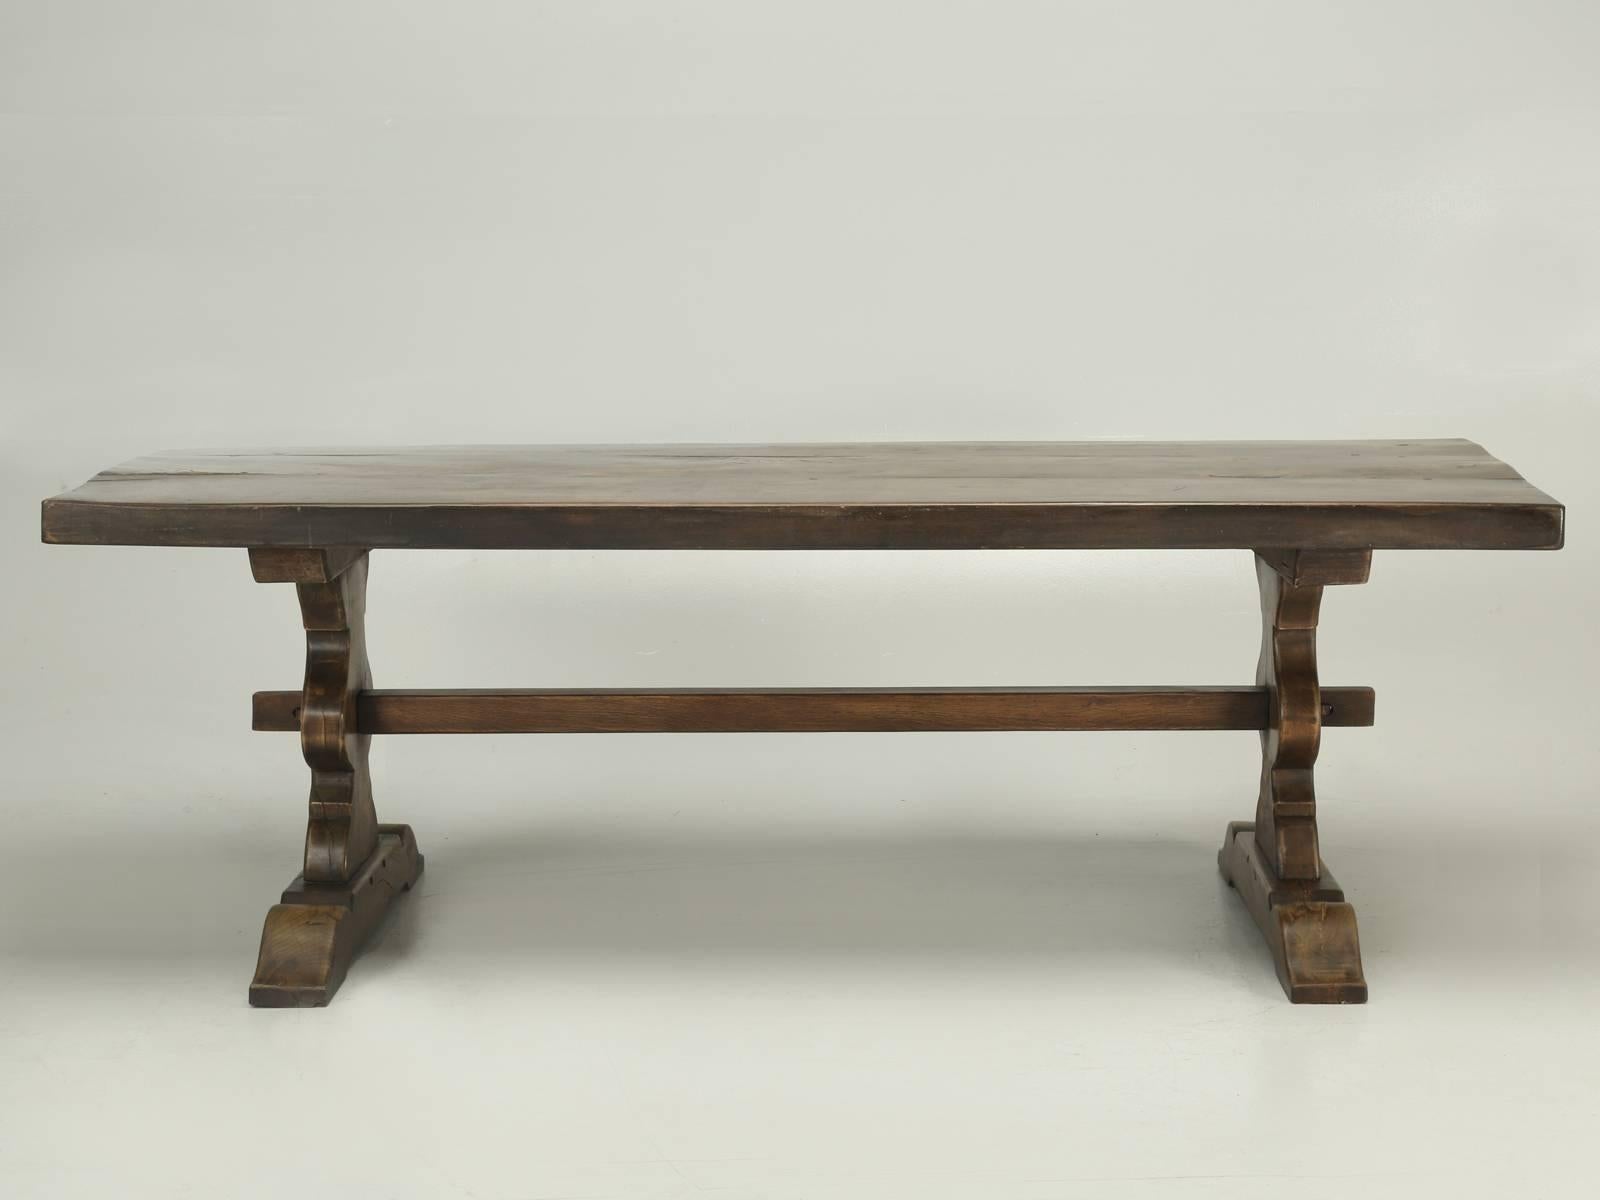 Early 20th Century Antique French Trestle Dining Table, circa 1900